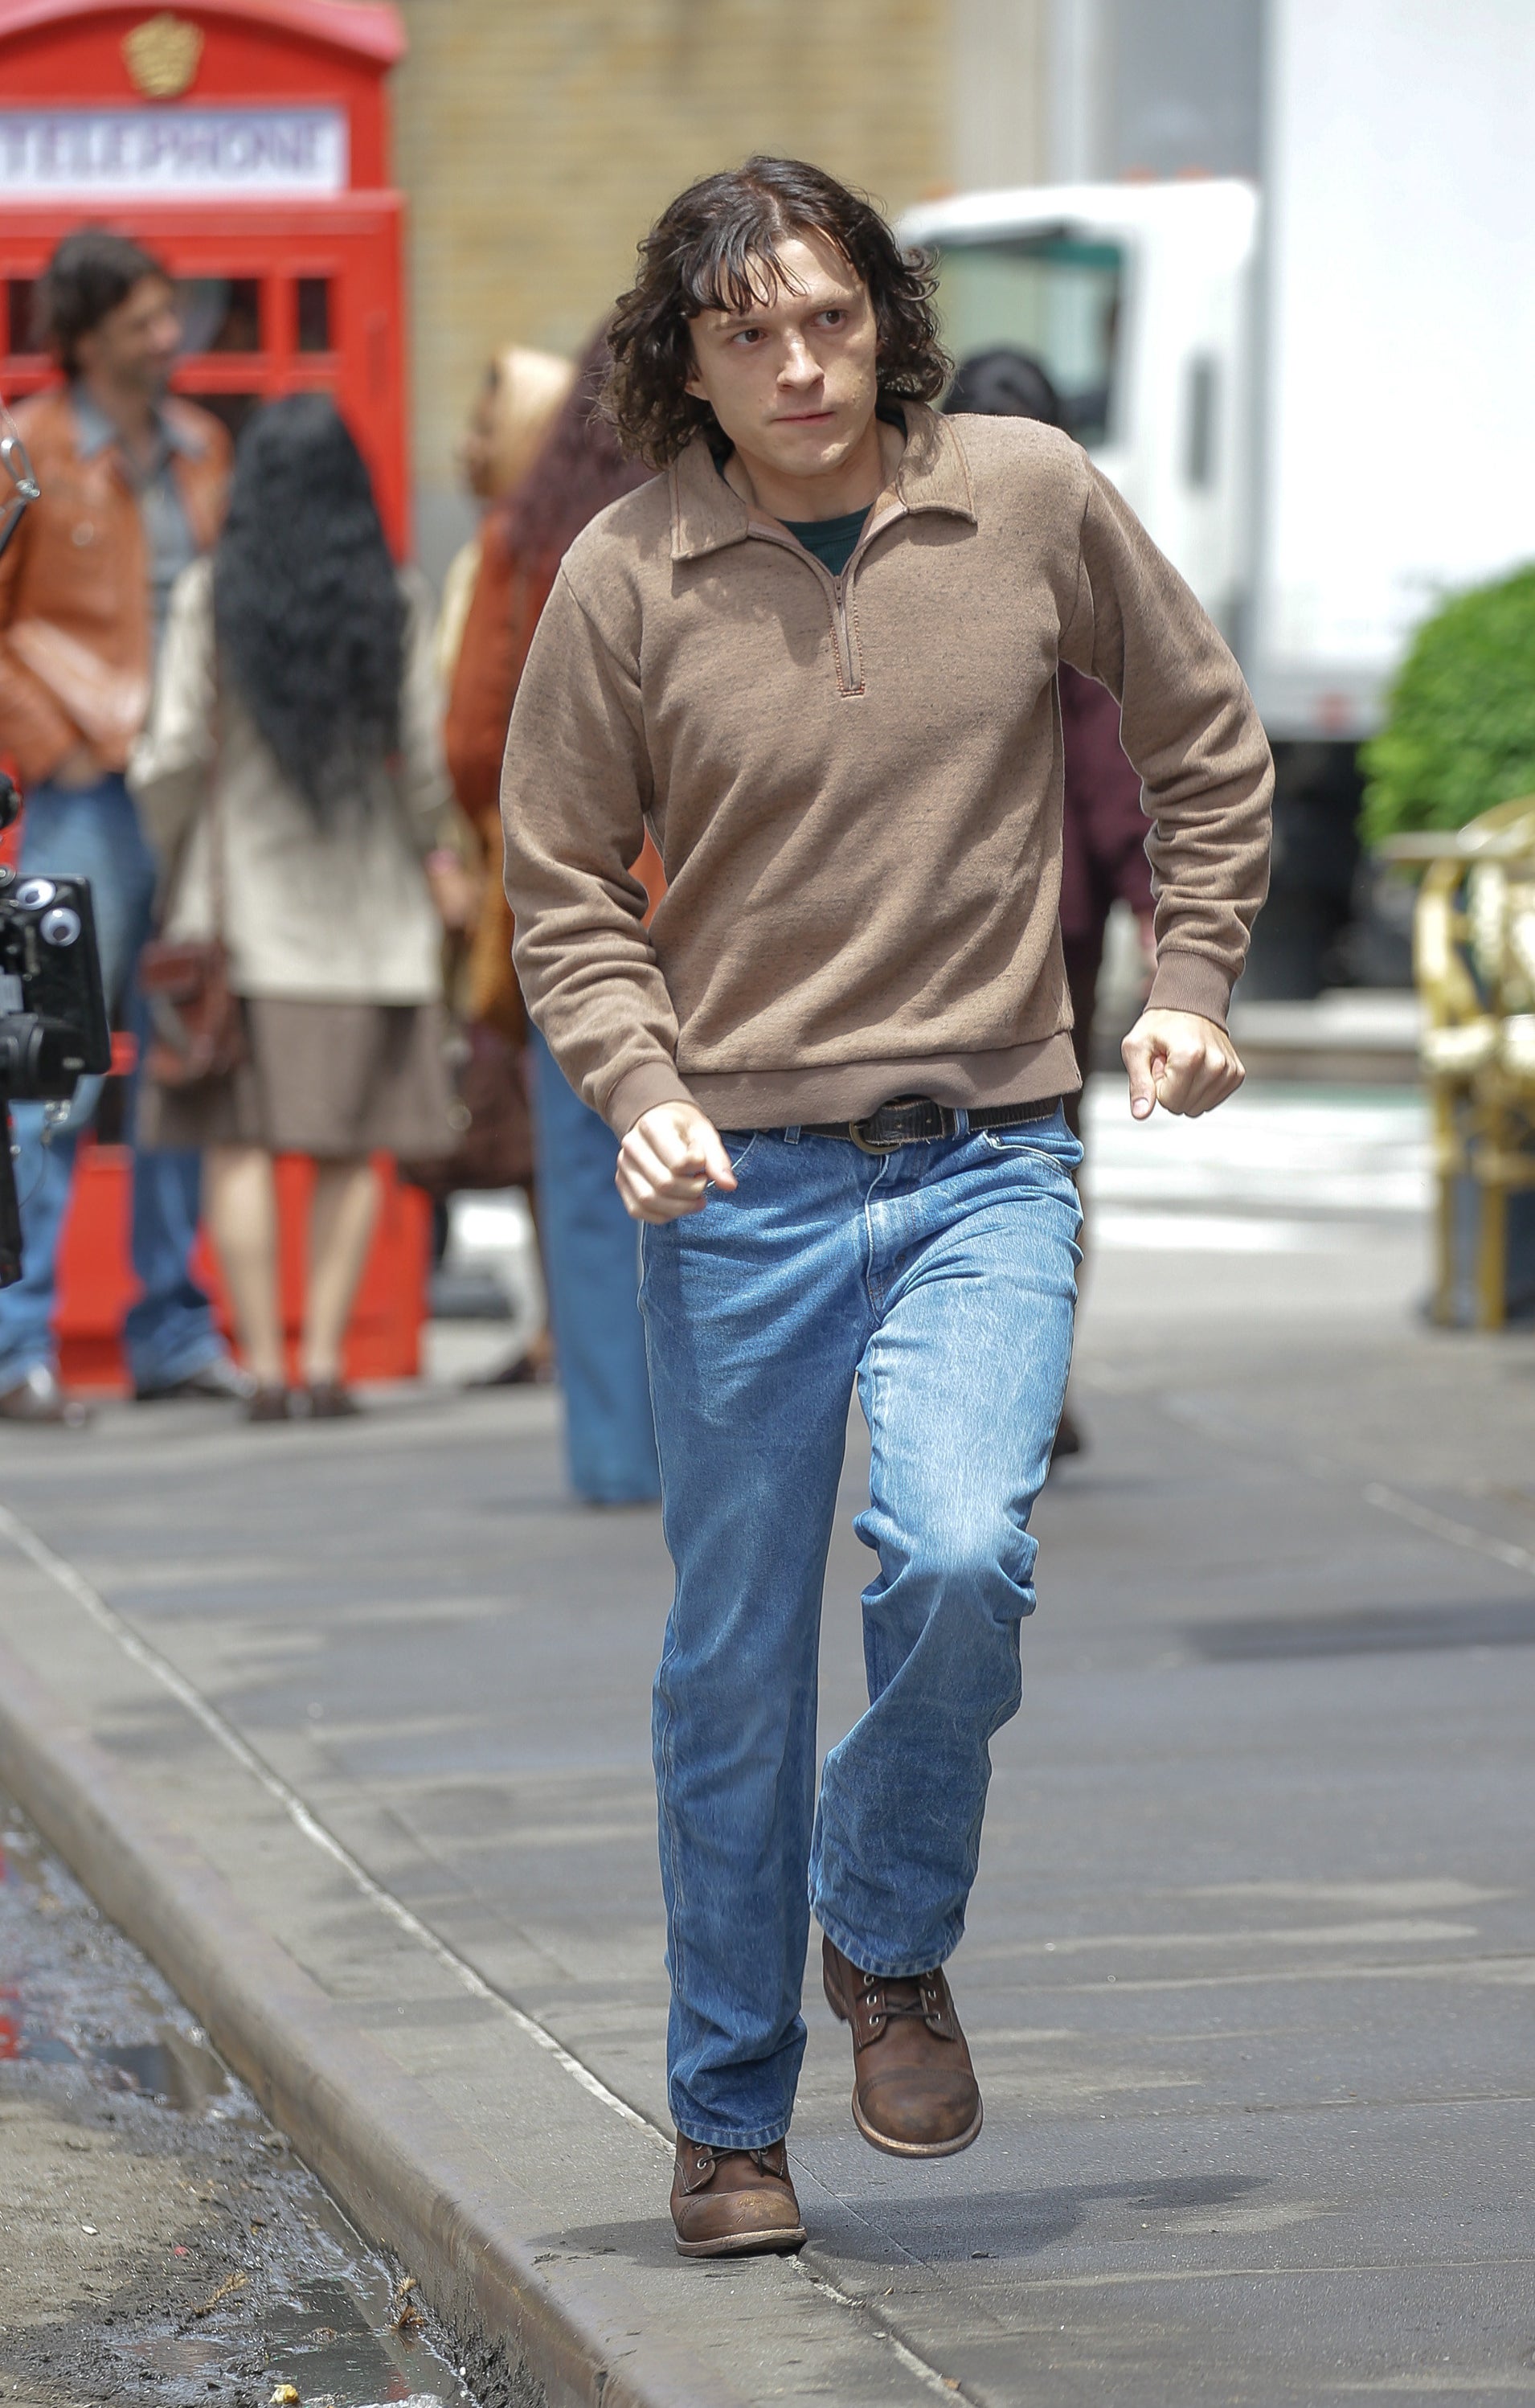 Close-up of Tom on the street in a scene from the show